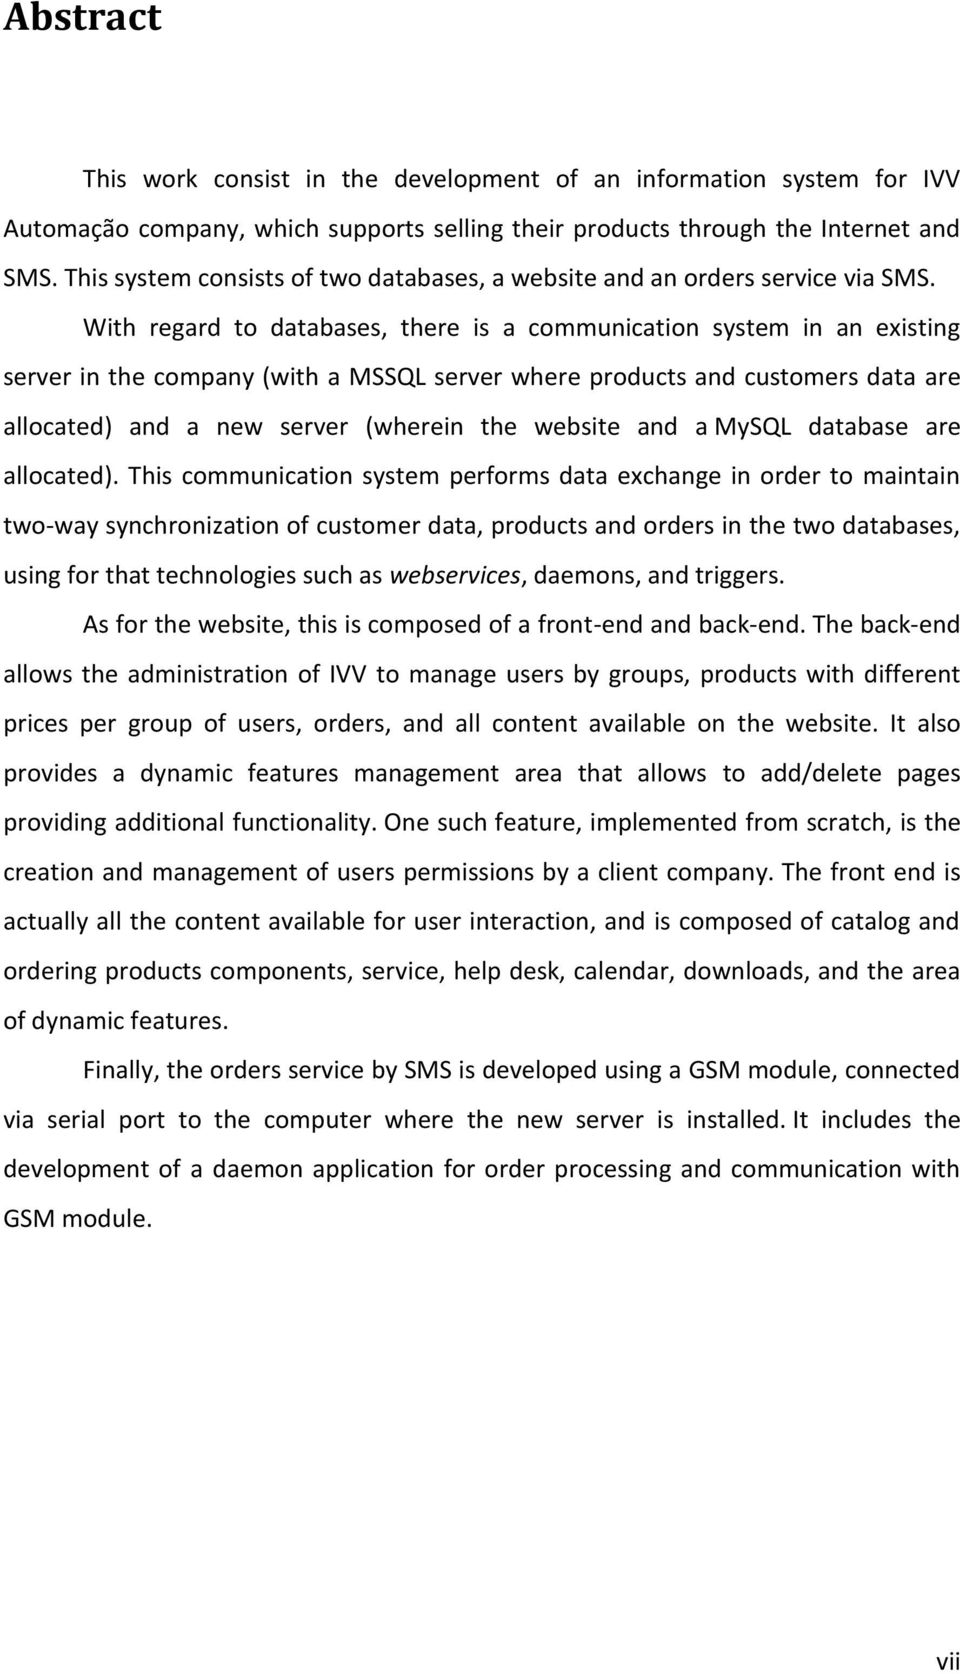 With regard to databases, there is a communication system in an existing server in the company (with a MSSQL server where products and customers data are allocated) and a new server (wherein the